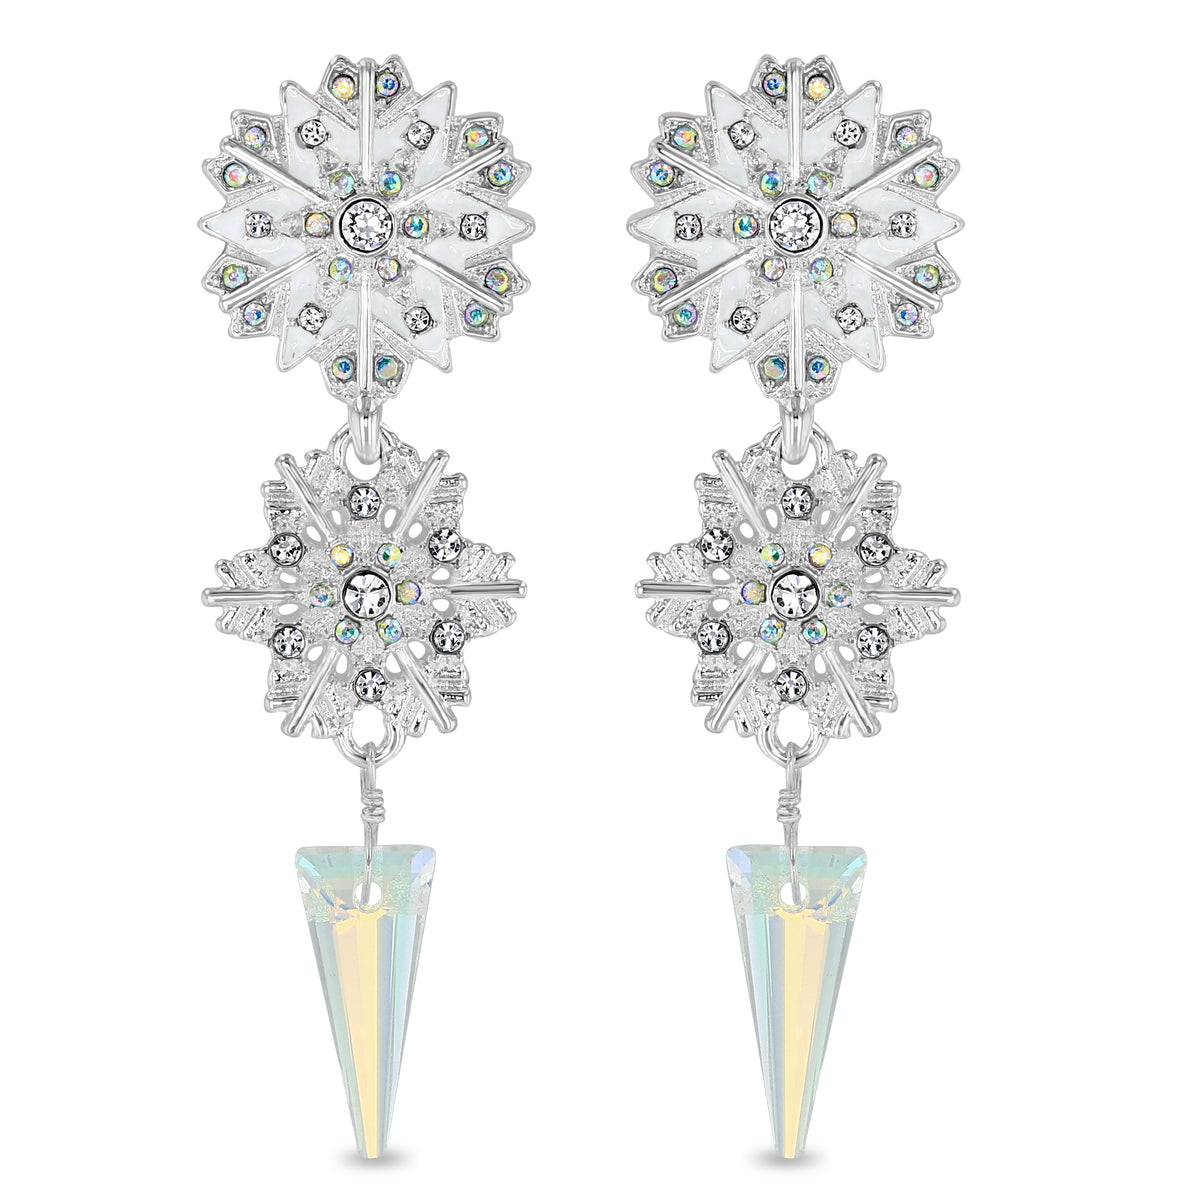 Crystal Winter Snow Flake Earrings by Ritzy Couture DeLuxe - Fine Silver Plating